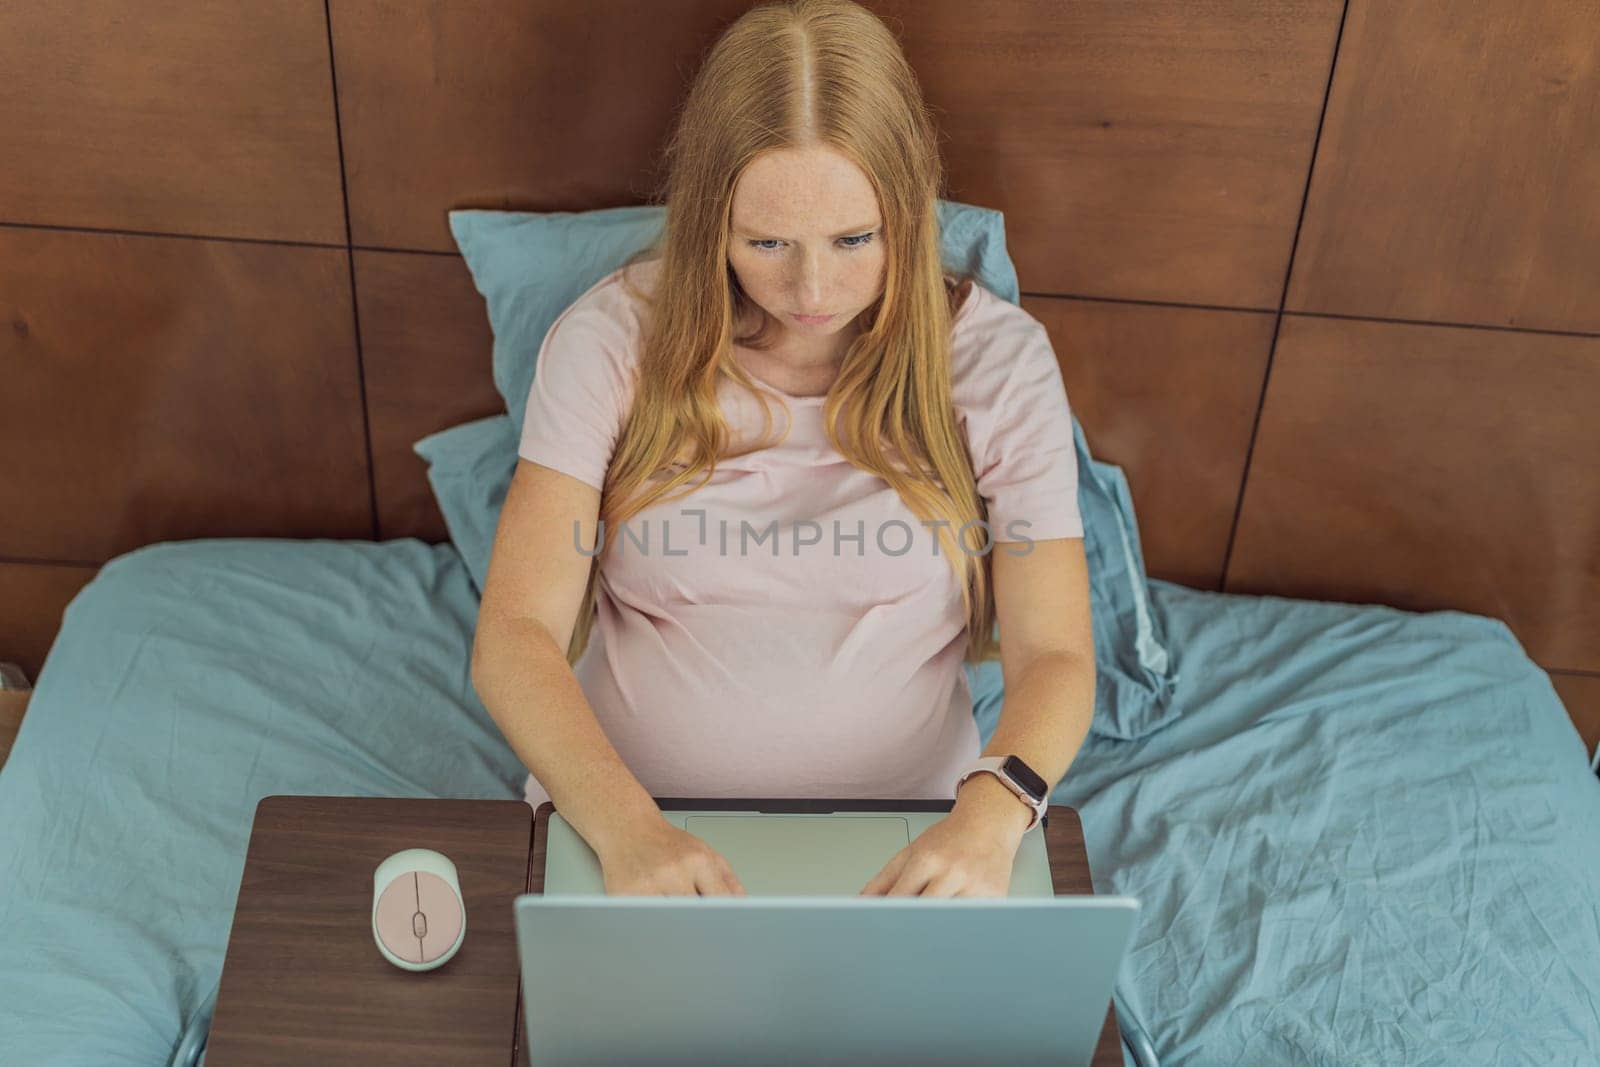 Pregnant woman working on laptop. Expectant woman efficiently works from home during pregnancy, blending professional commitment with maternal duties by galitskaya